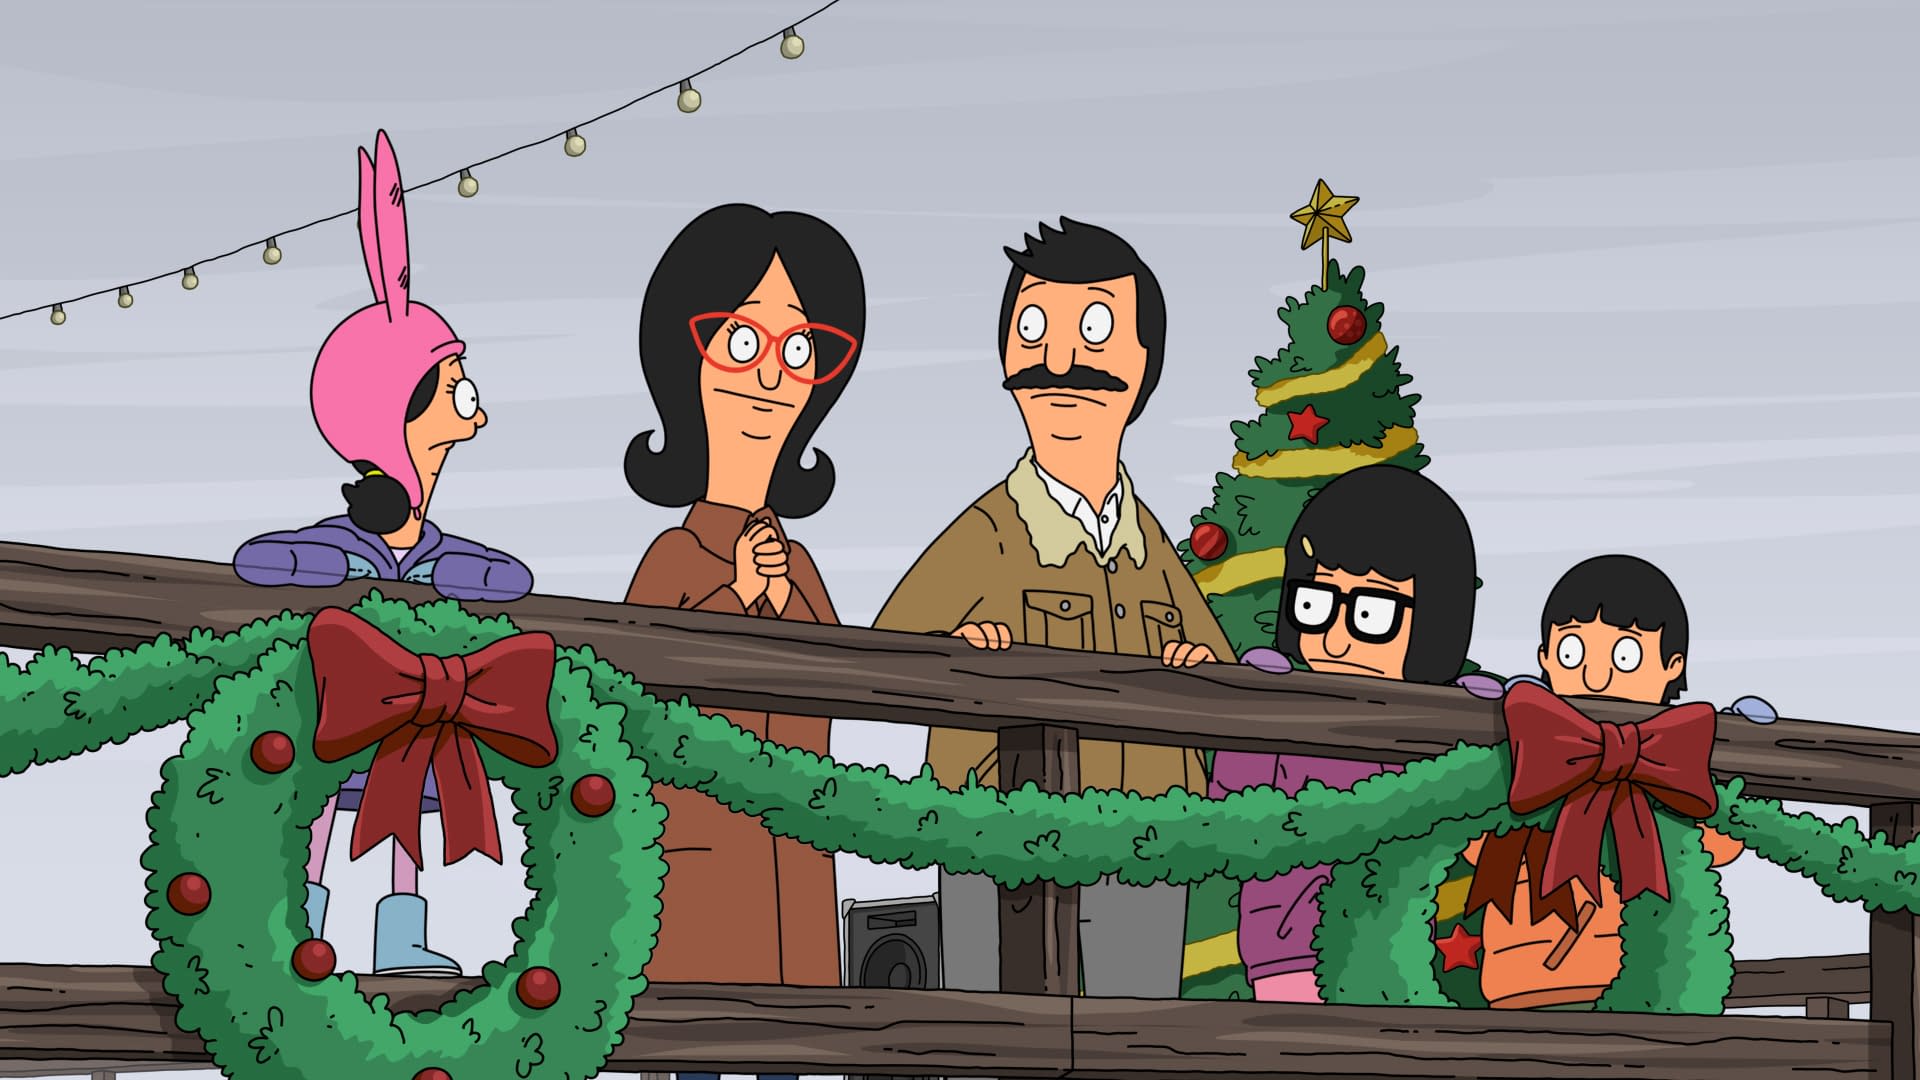 Bob's Burgers Finds Christmas In 'Yachty Or Nice' Episode: Review